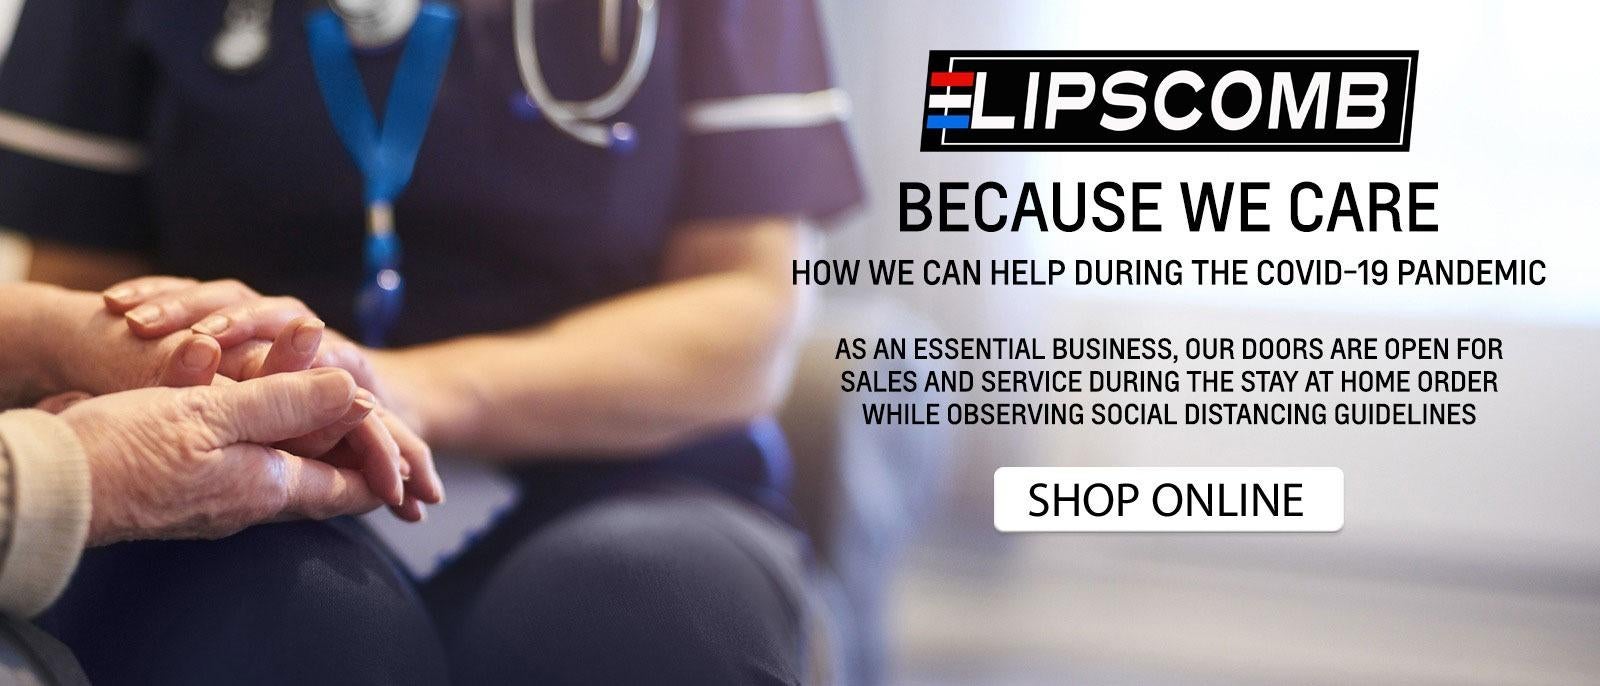 Lipscomb - Because We Care. Shop Online.